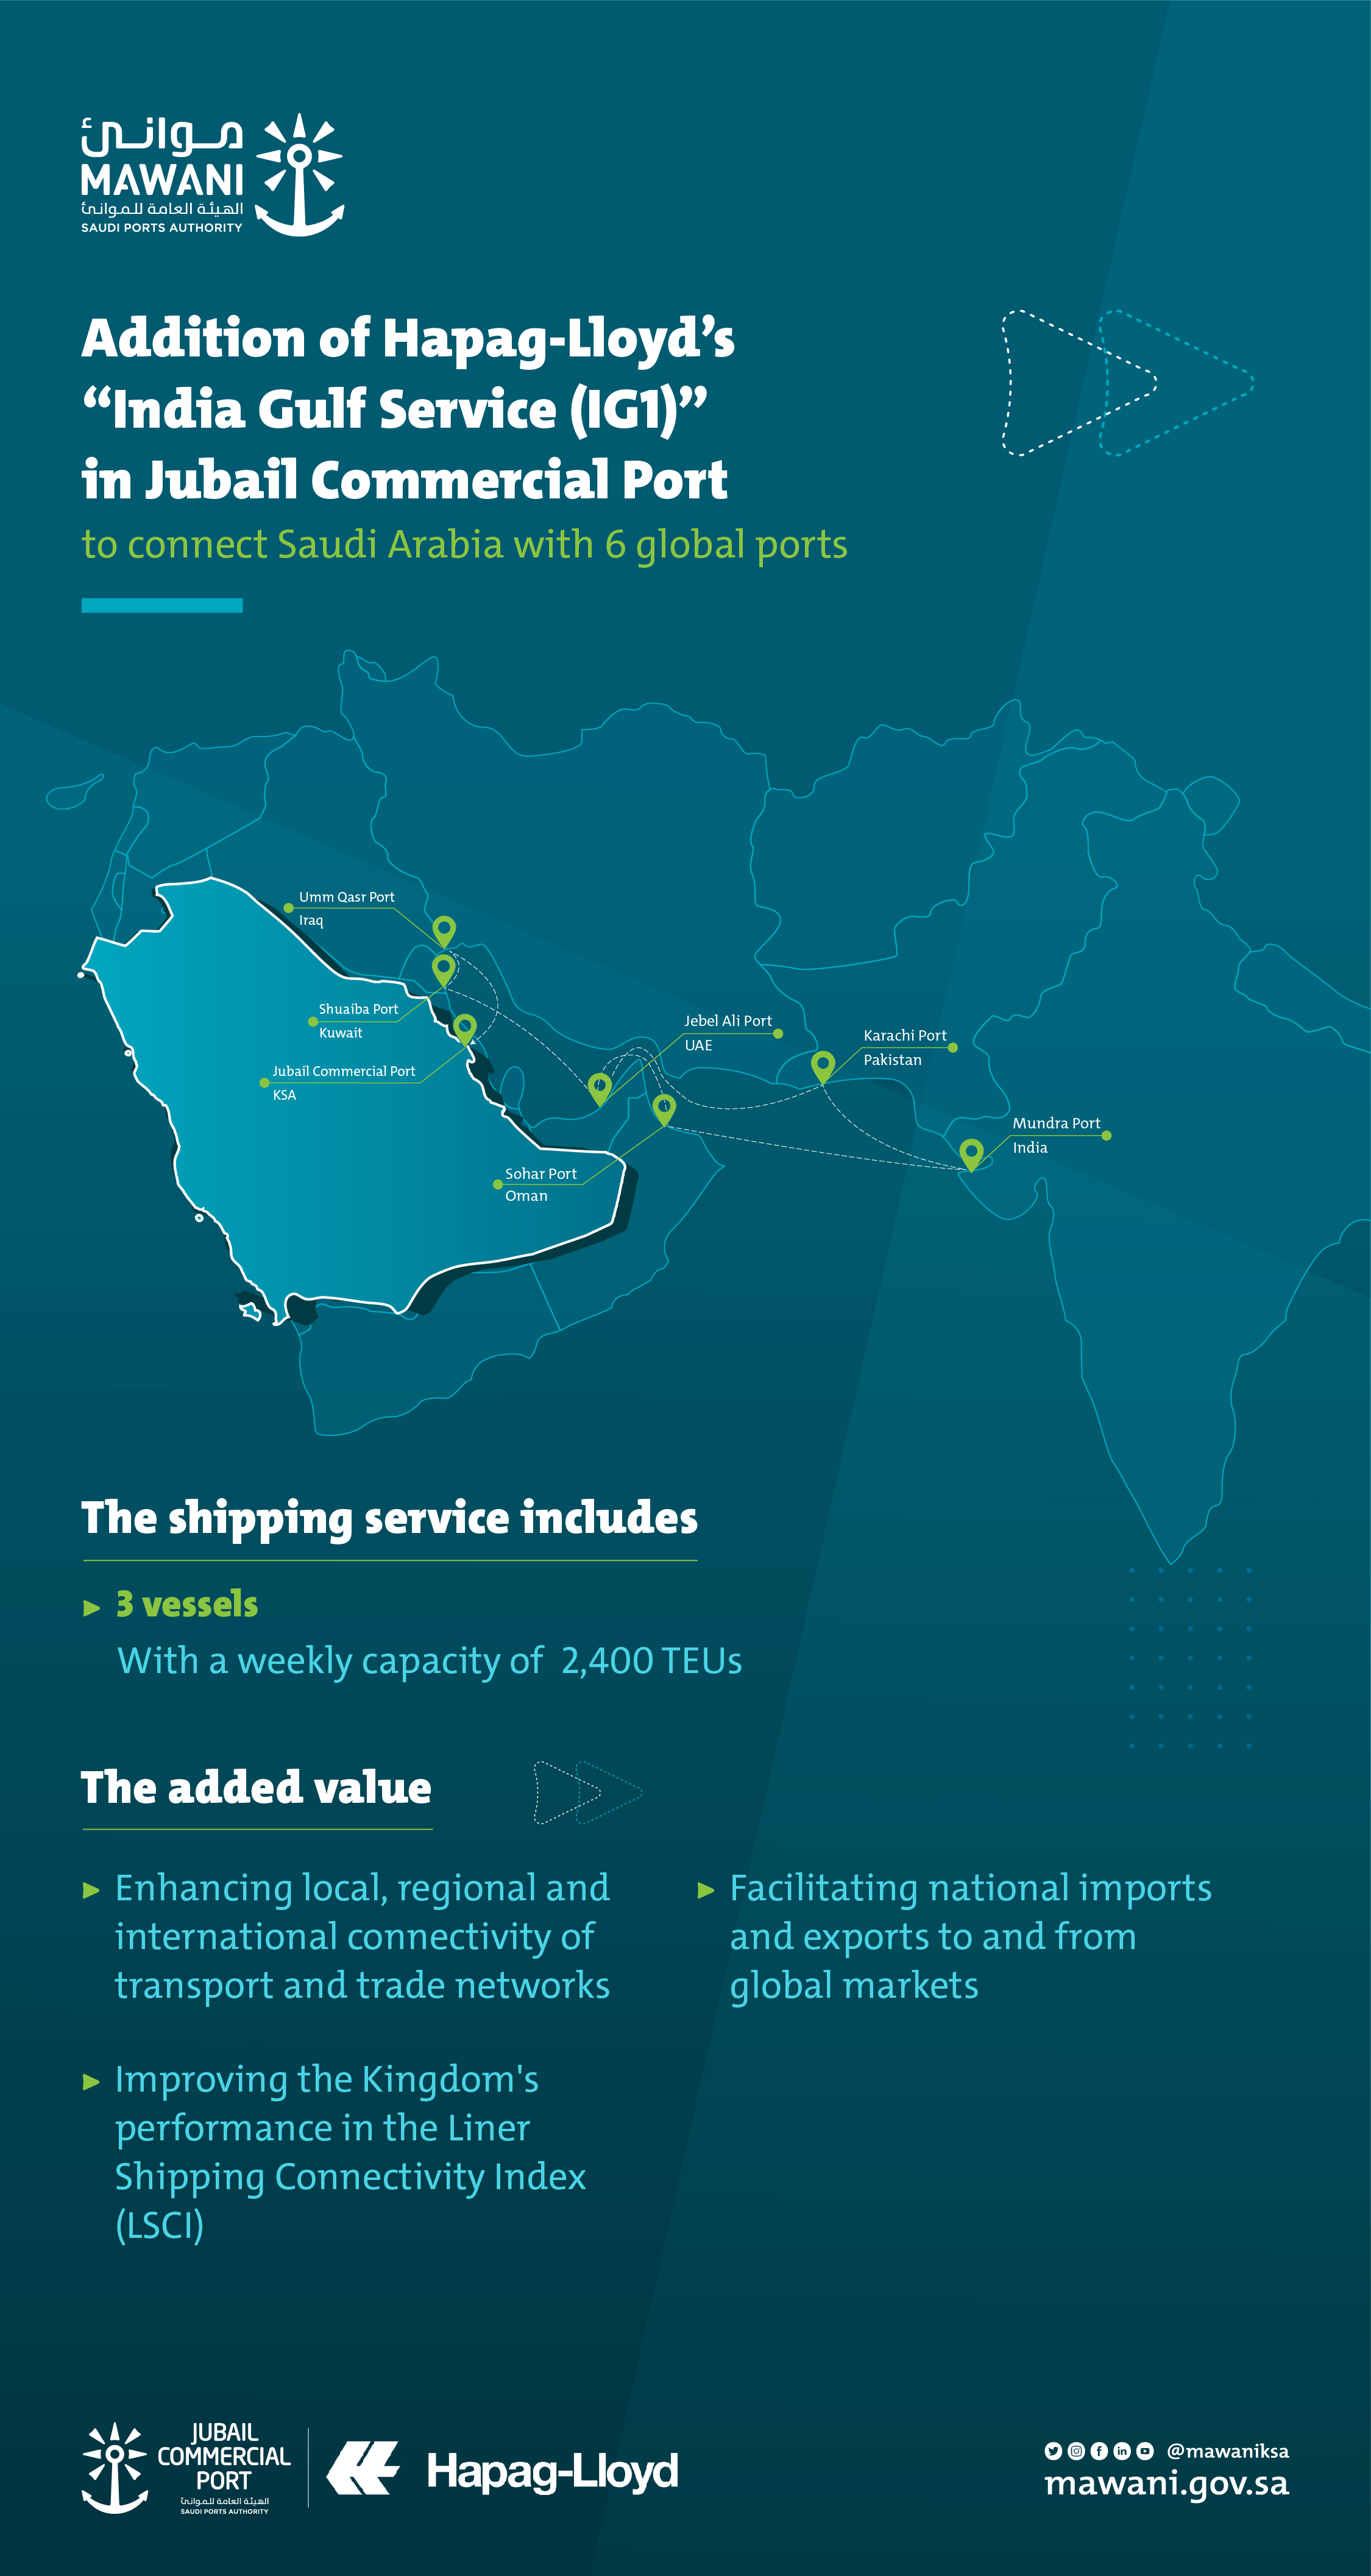 New Trade Route to Link Jubail Commercial Port to 6 Global Ports